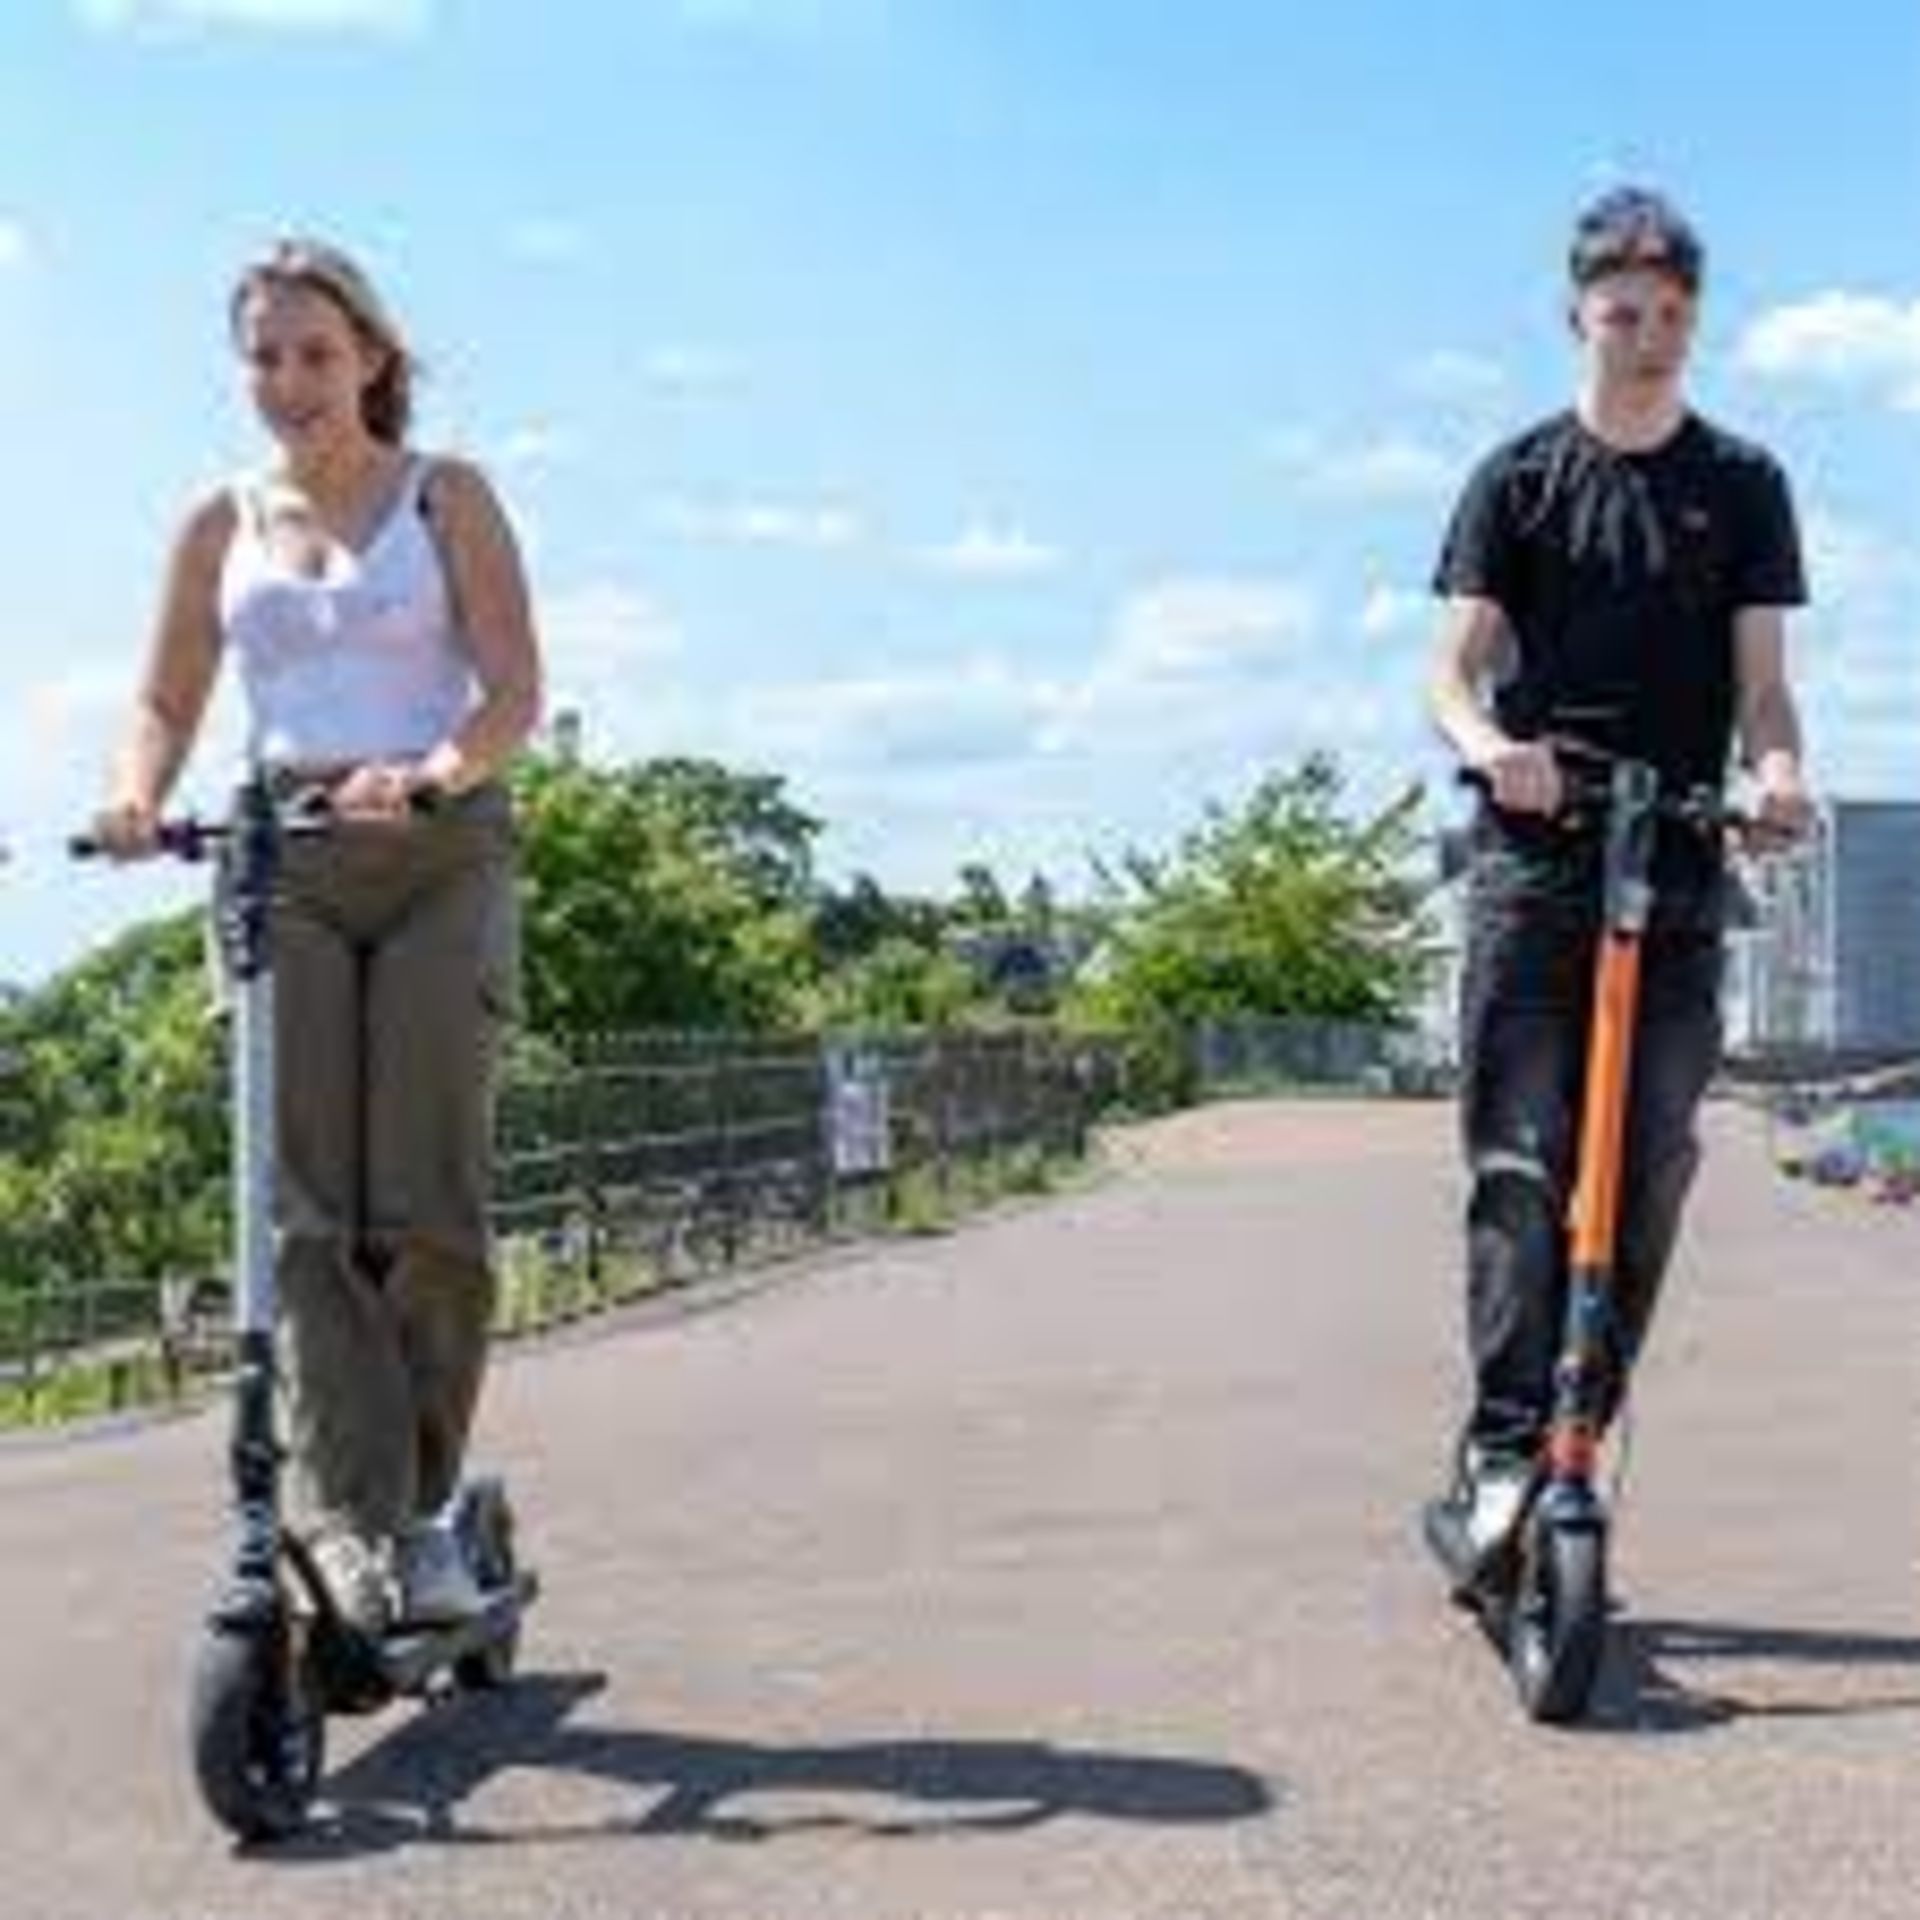 Trade Lot 4 x Brand New E-Glide V2 Electric Scooter Grey and Black RRP £599, Introducing a sleek and - Bild 3 aus 3